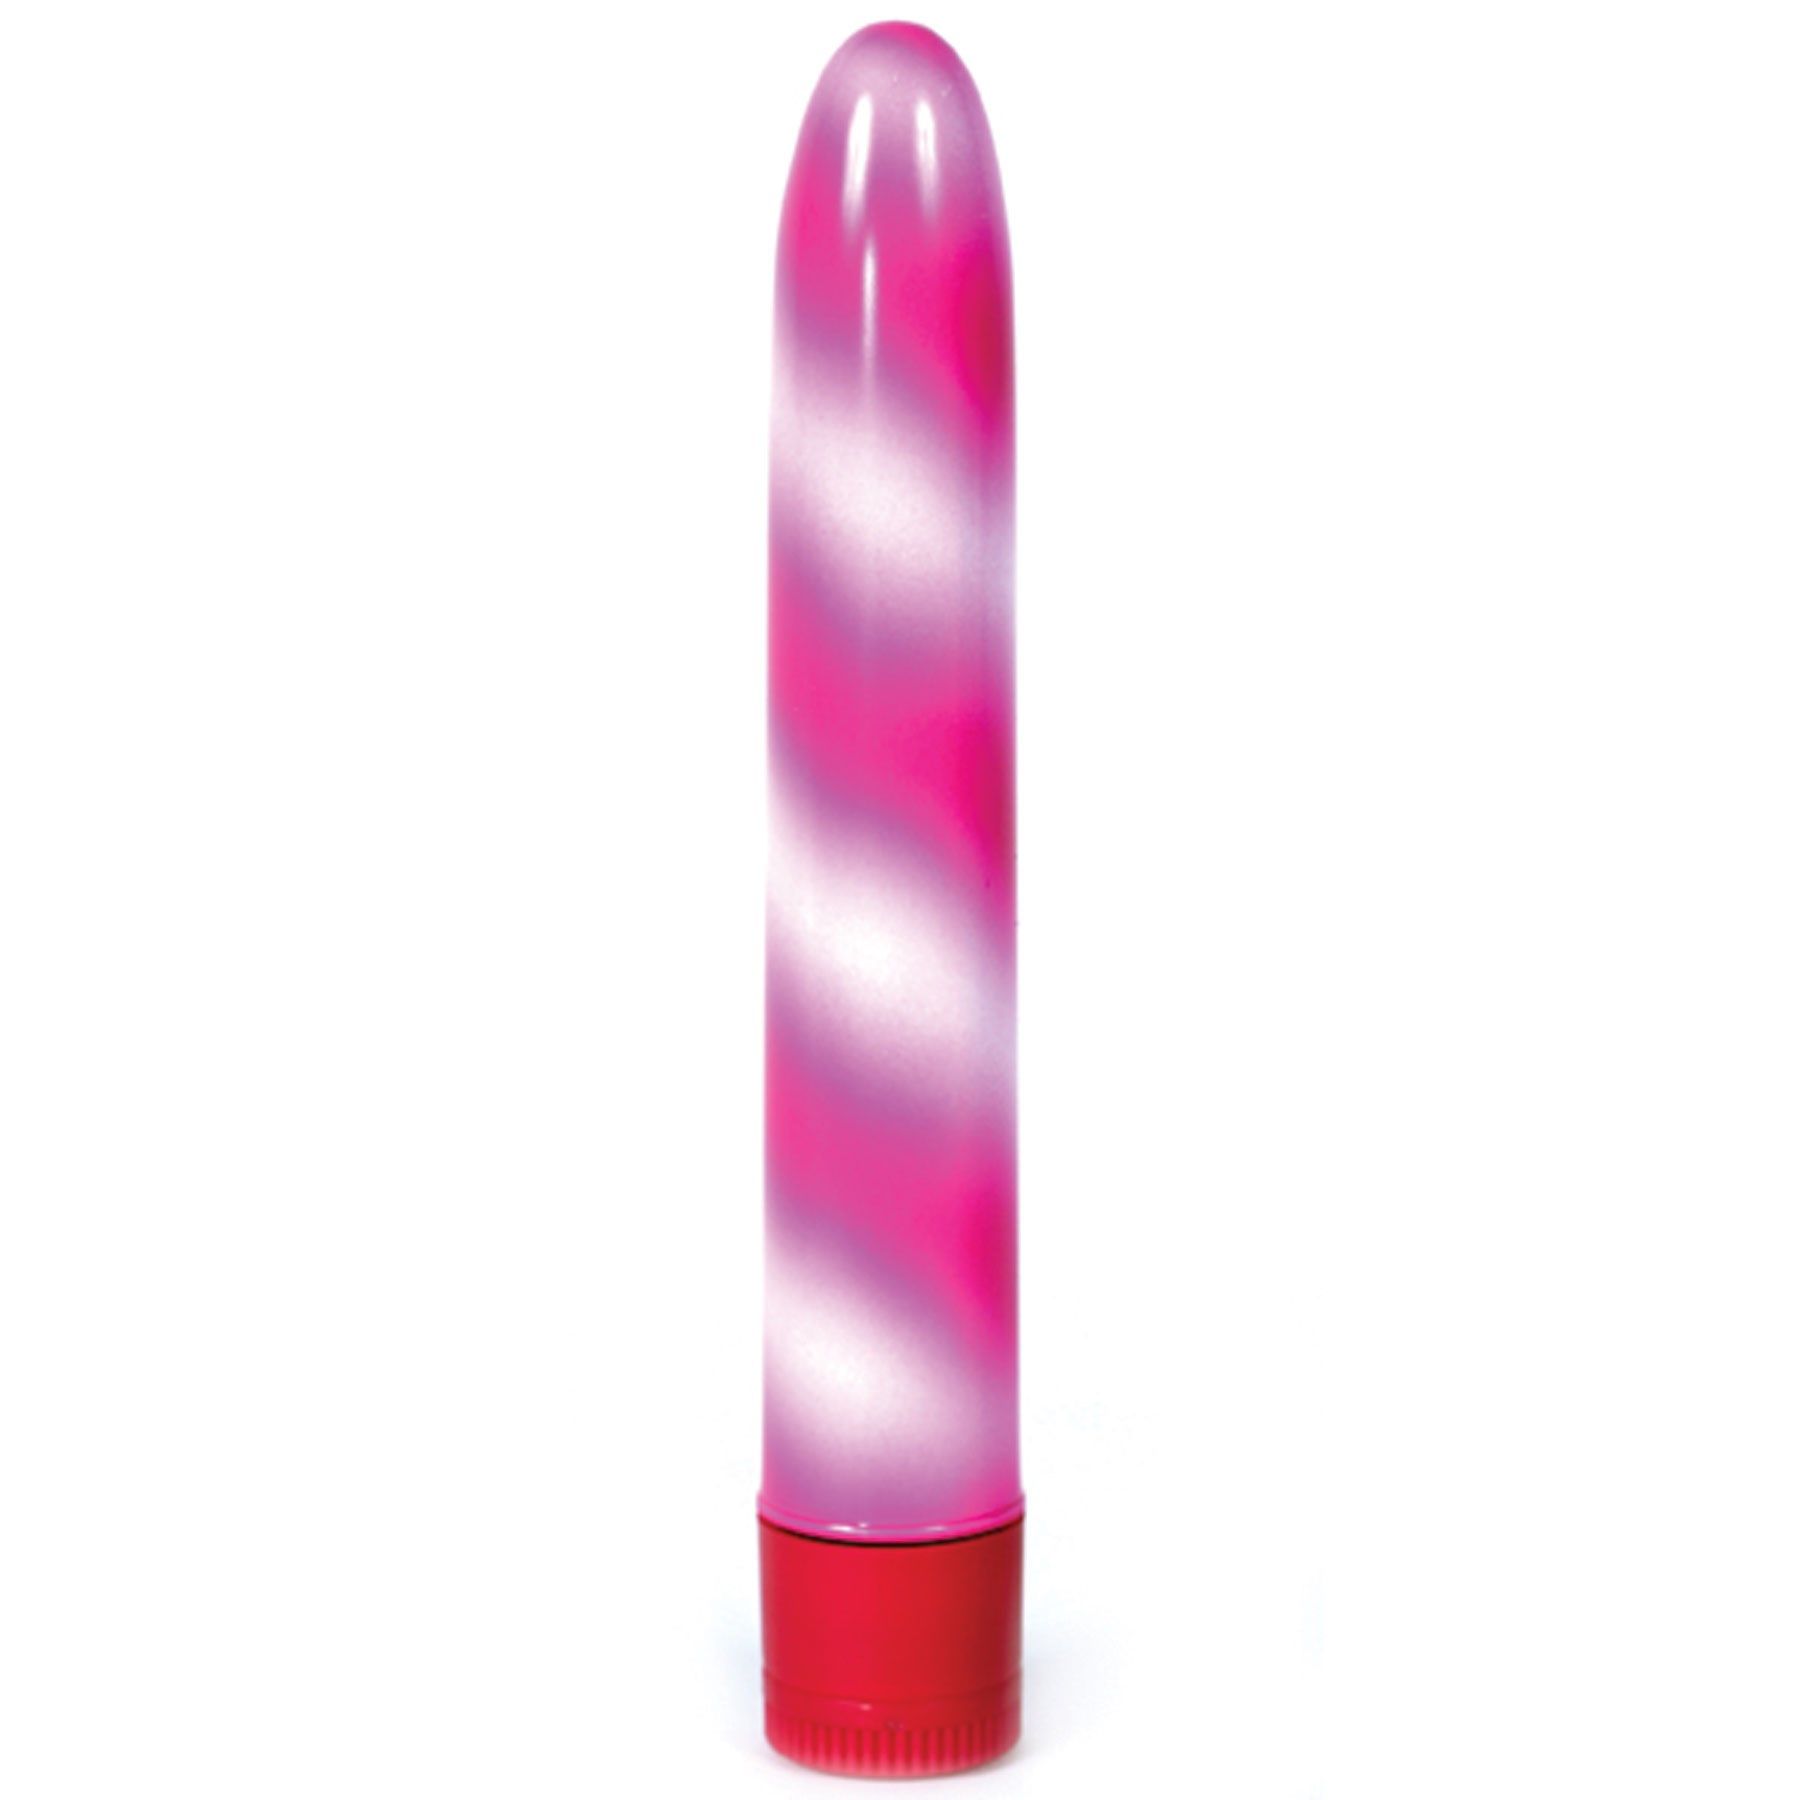 15 Crazy Holiday Sex Toys That Will Shake You to Your Core